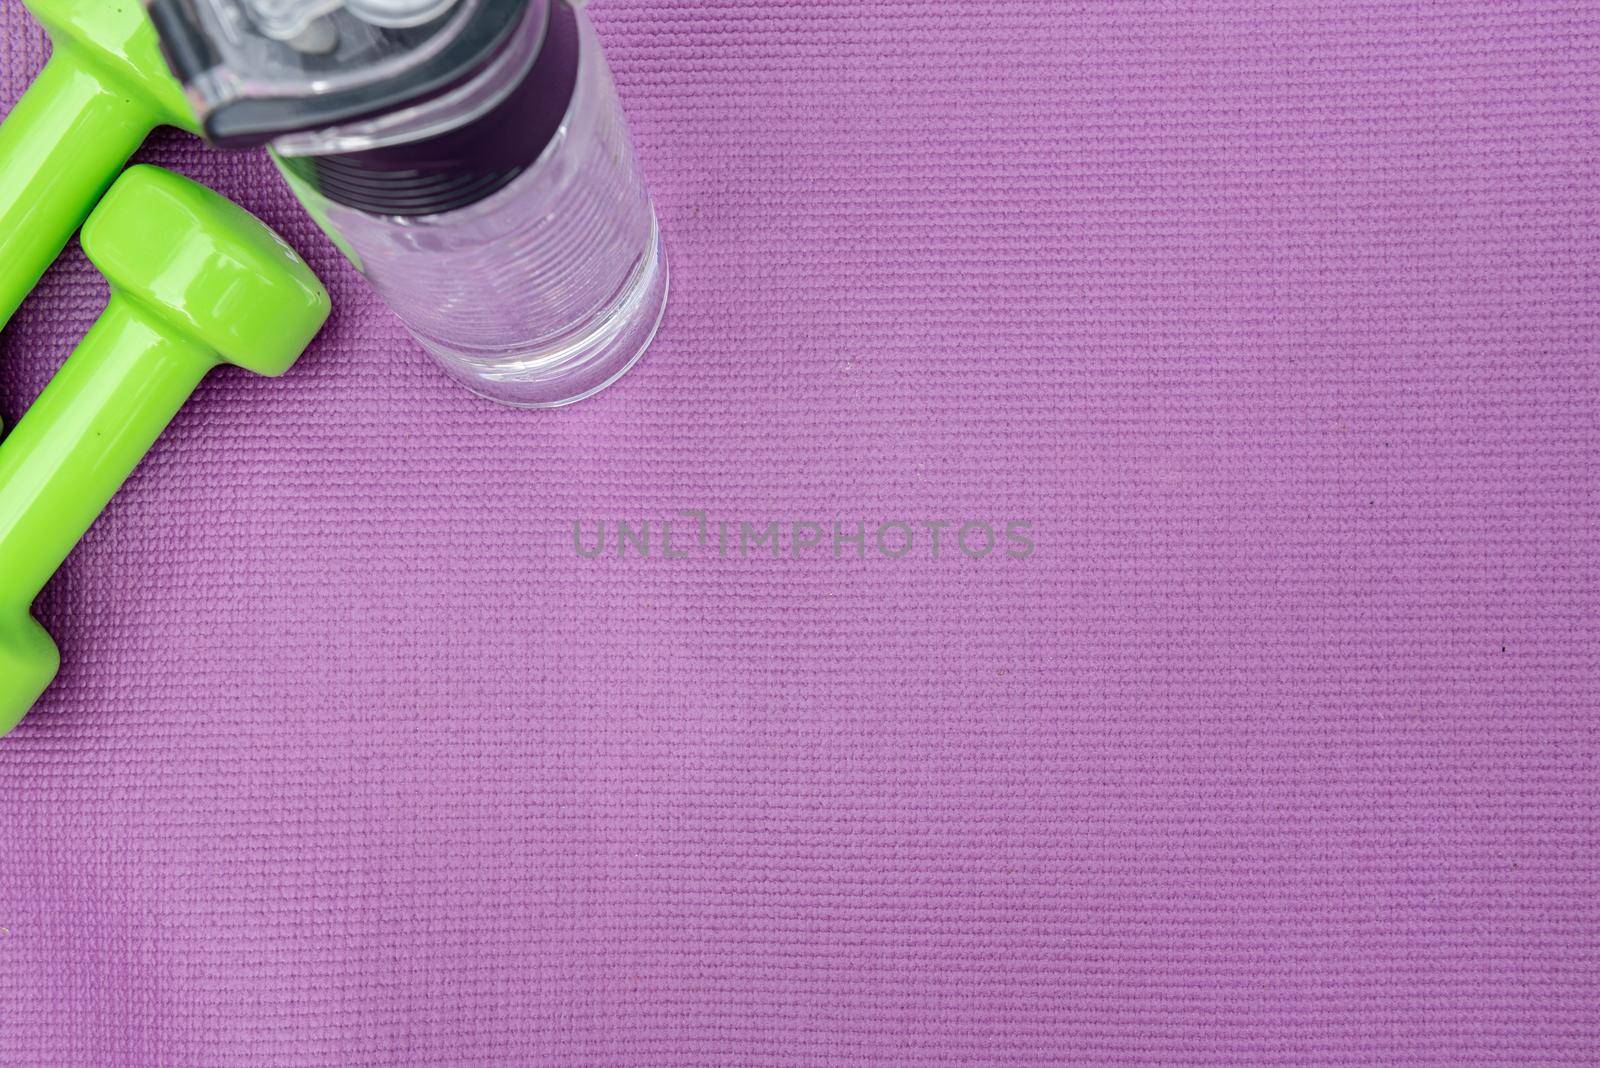 Ladie's dumbbells and water bottle over purple fitness mat, top view. Sport concept